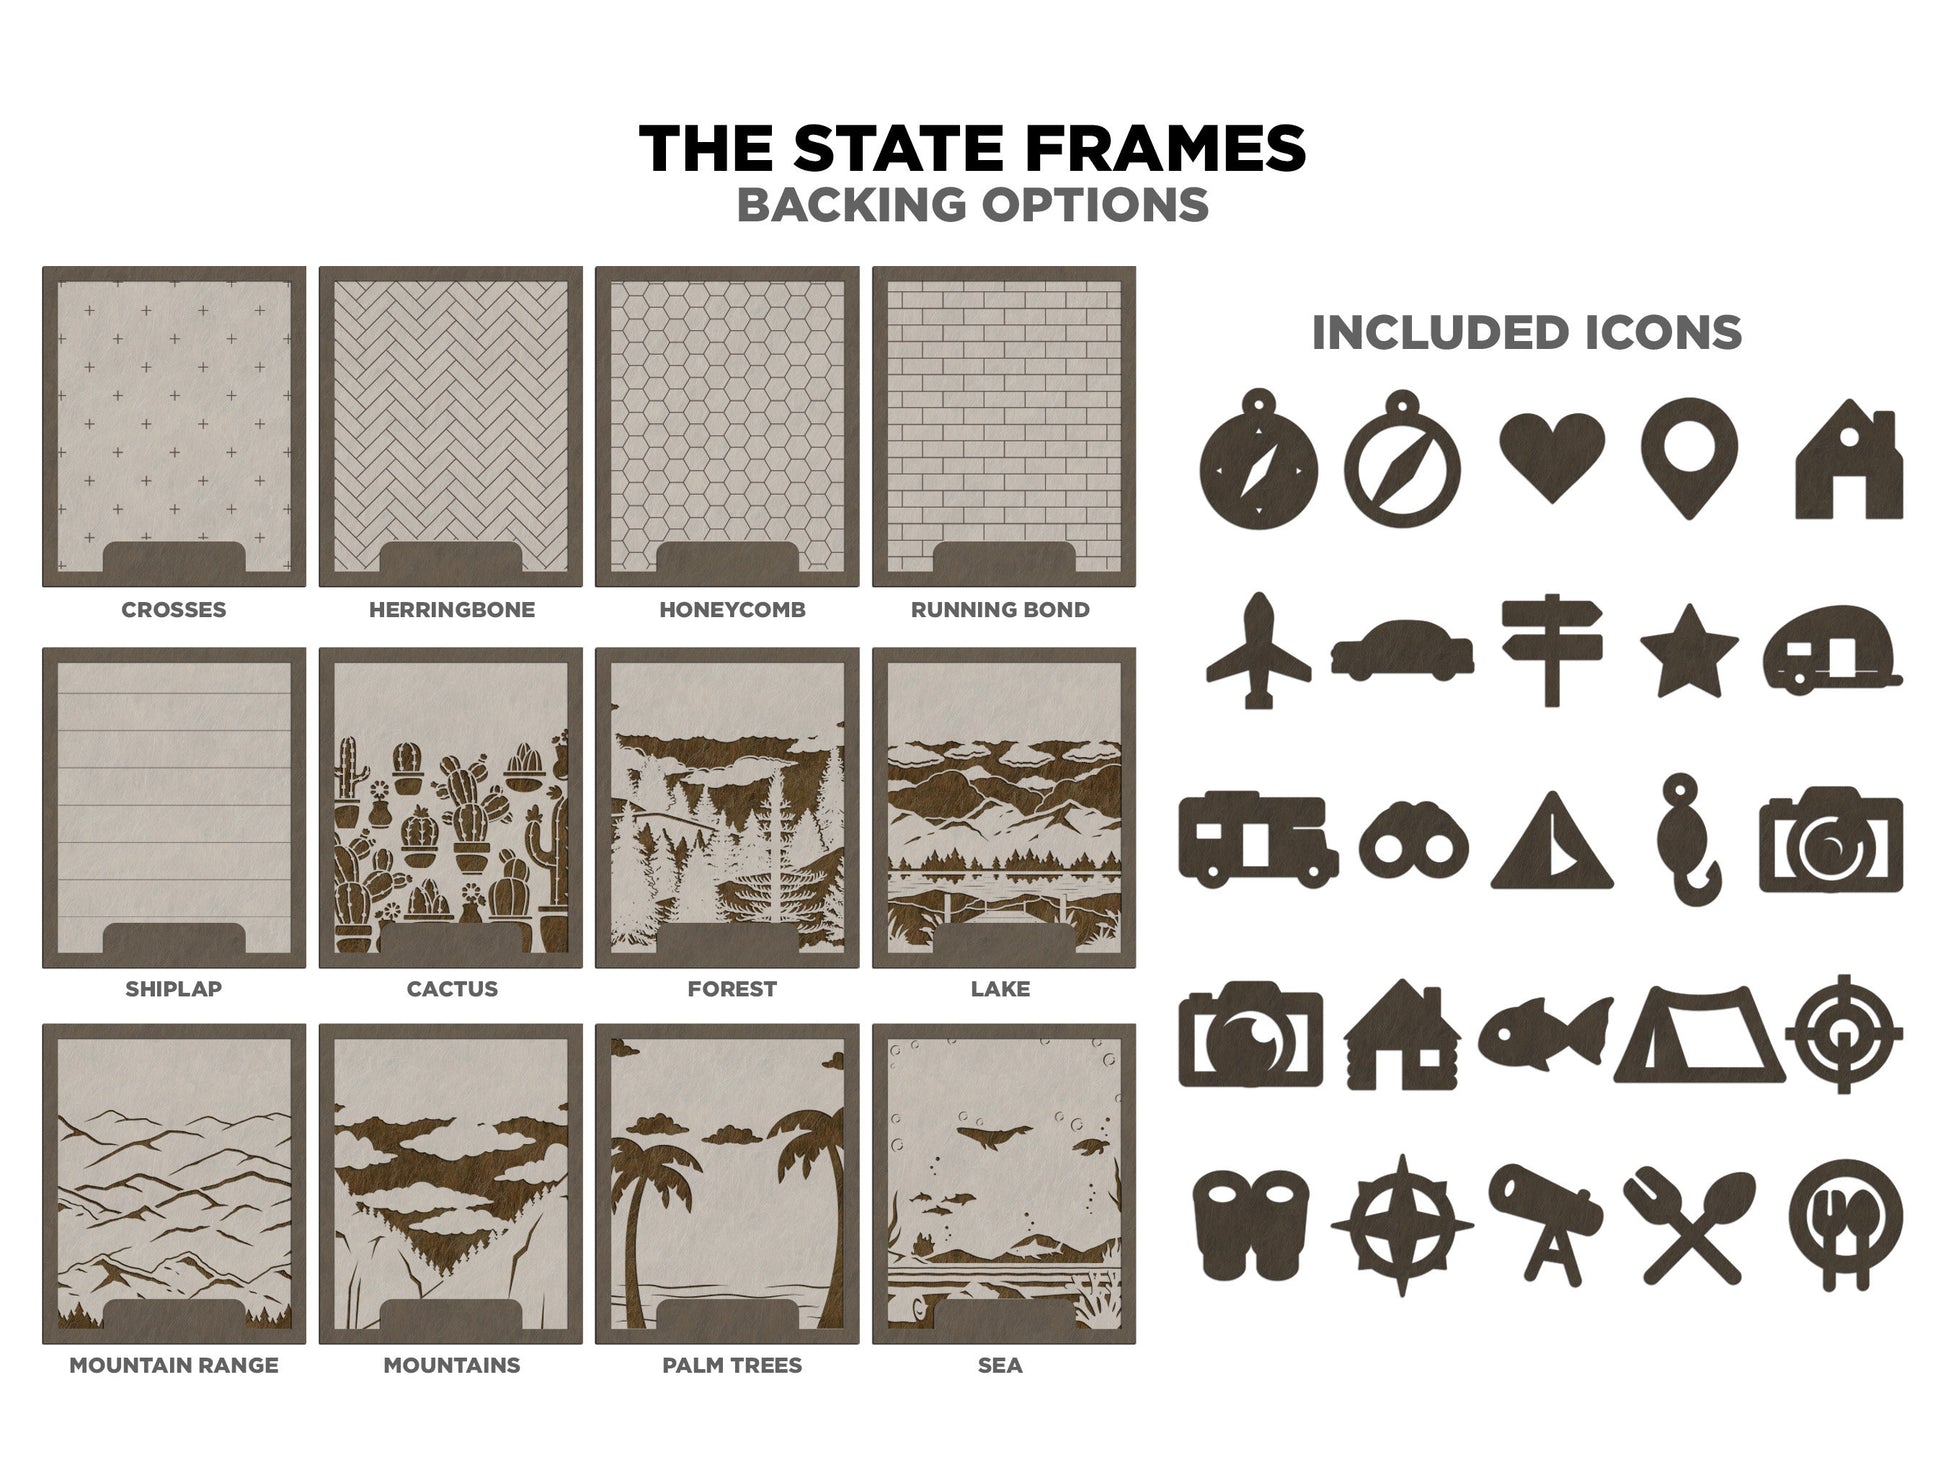 The North Carolina State Frame - 13 text options, 12 backgrounds, 25 icons Included - Make over 7,500 designs - Glowforge & Lightburn Tested